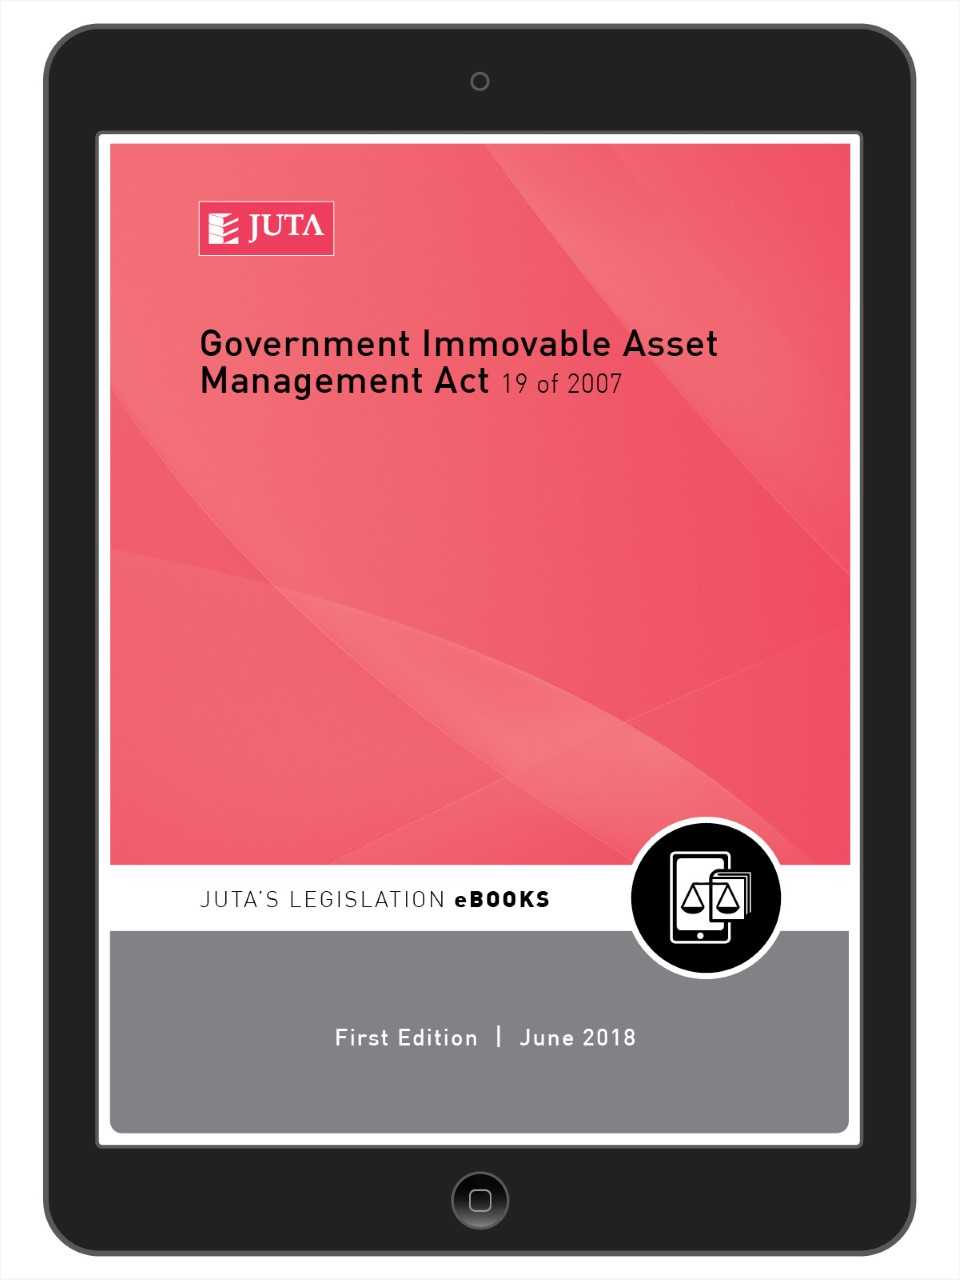 Government Immovable Asset Management Act 19 of 2007